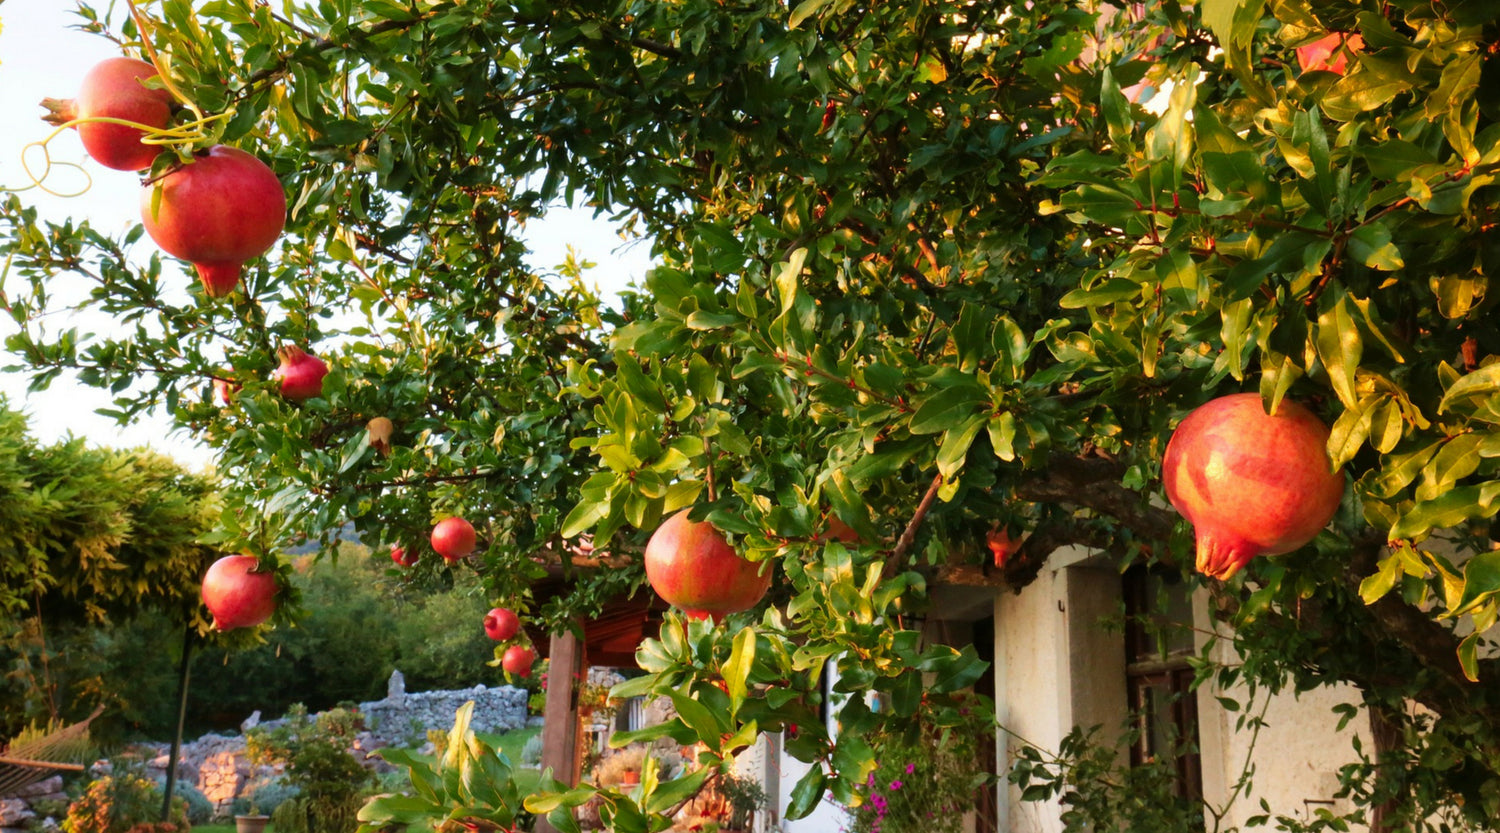 Grow Your Very Own Healthy And Delicious Fruits At Your Own Home!